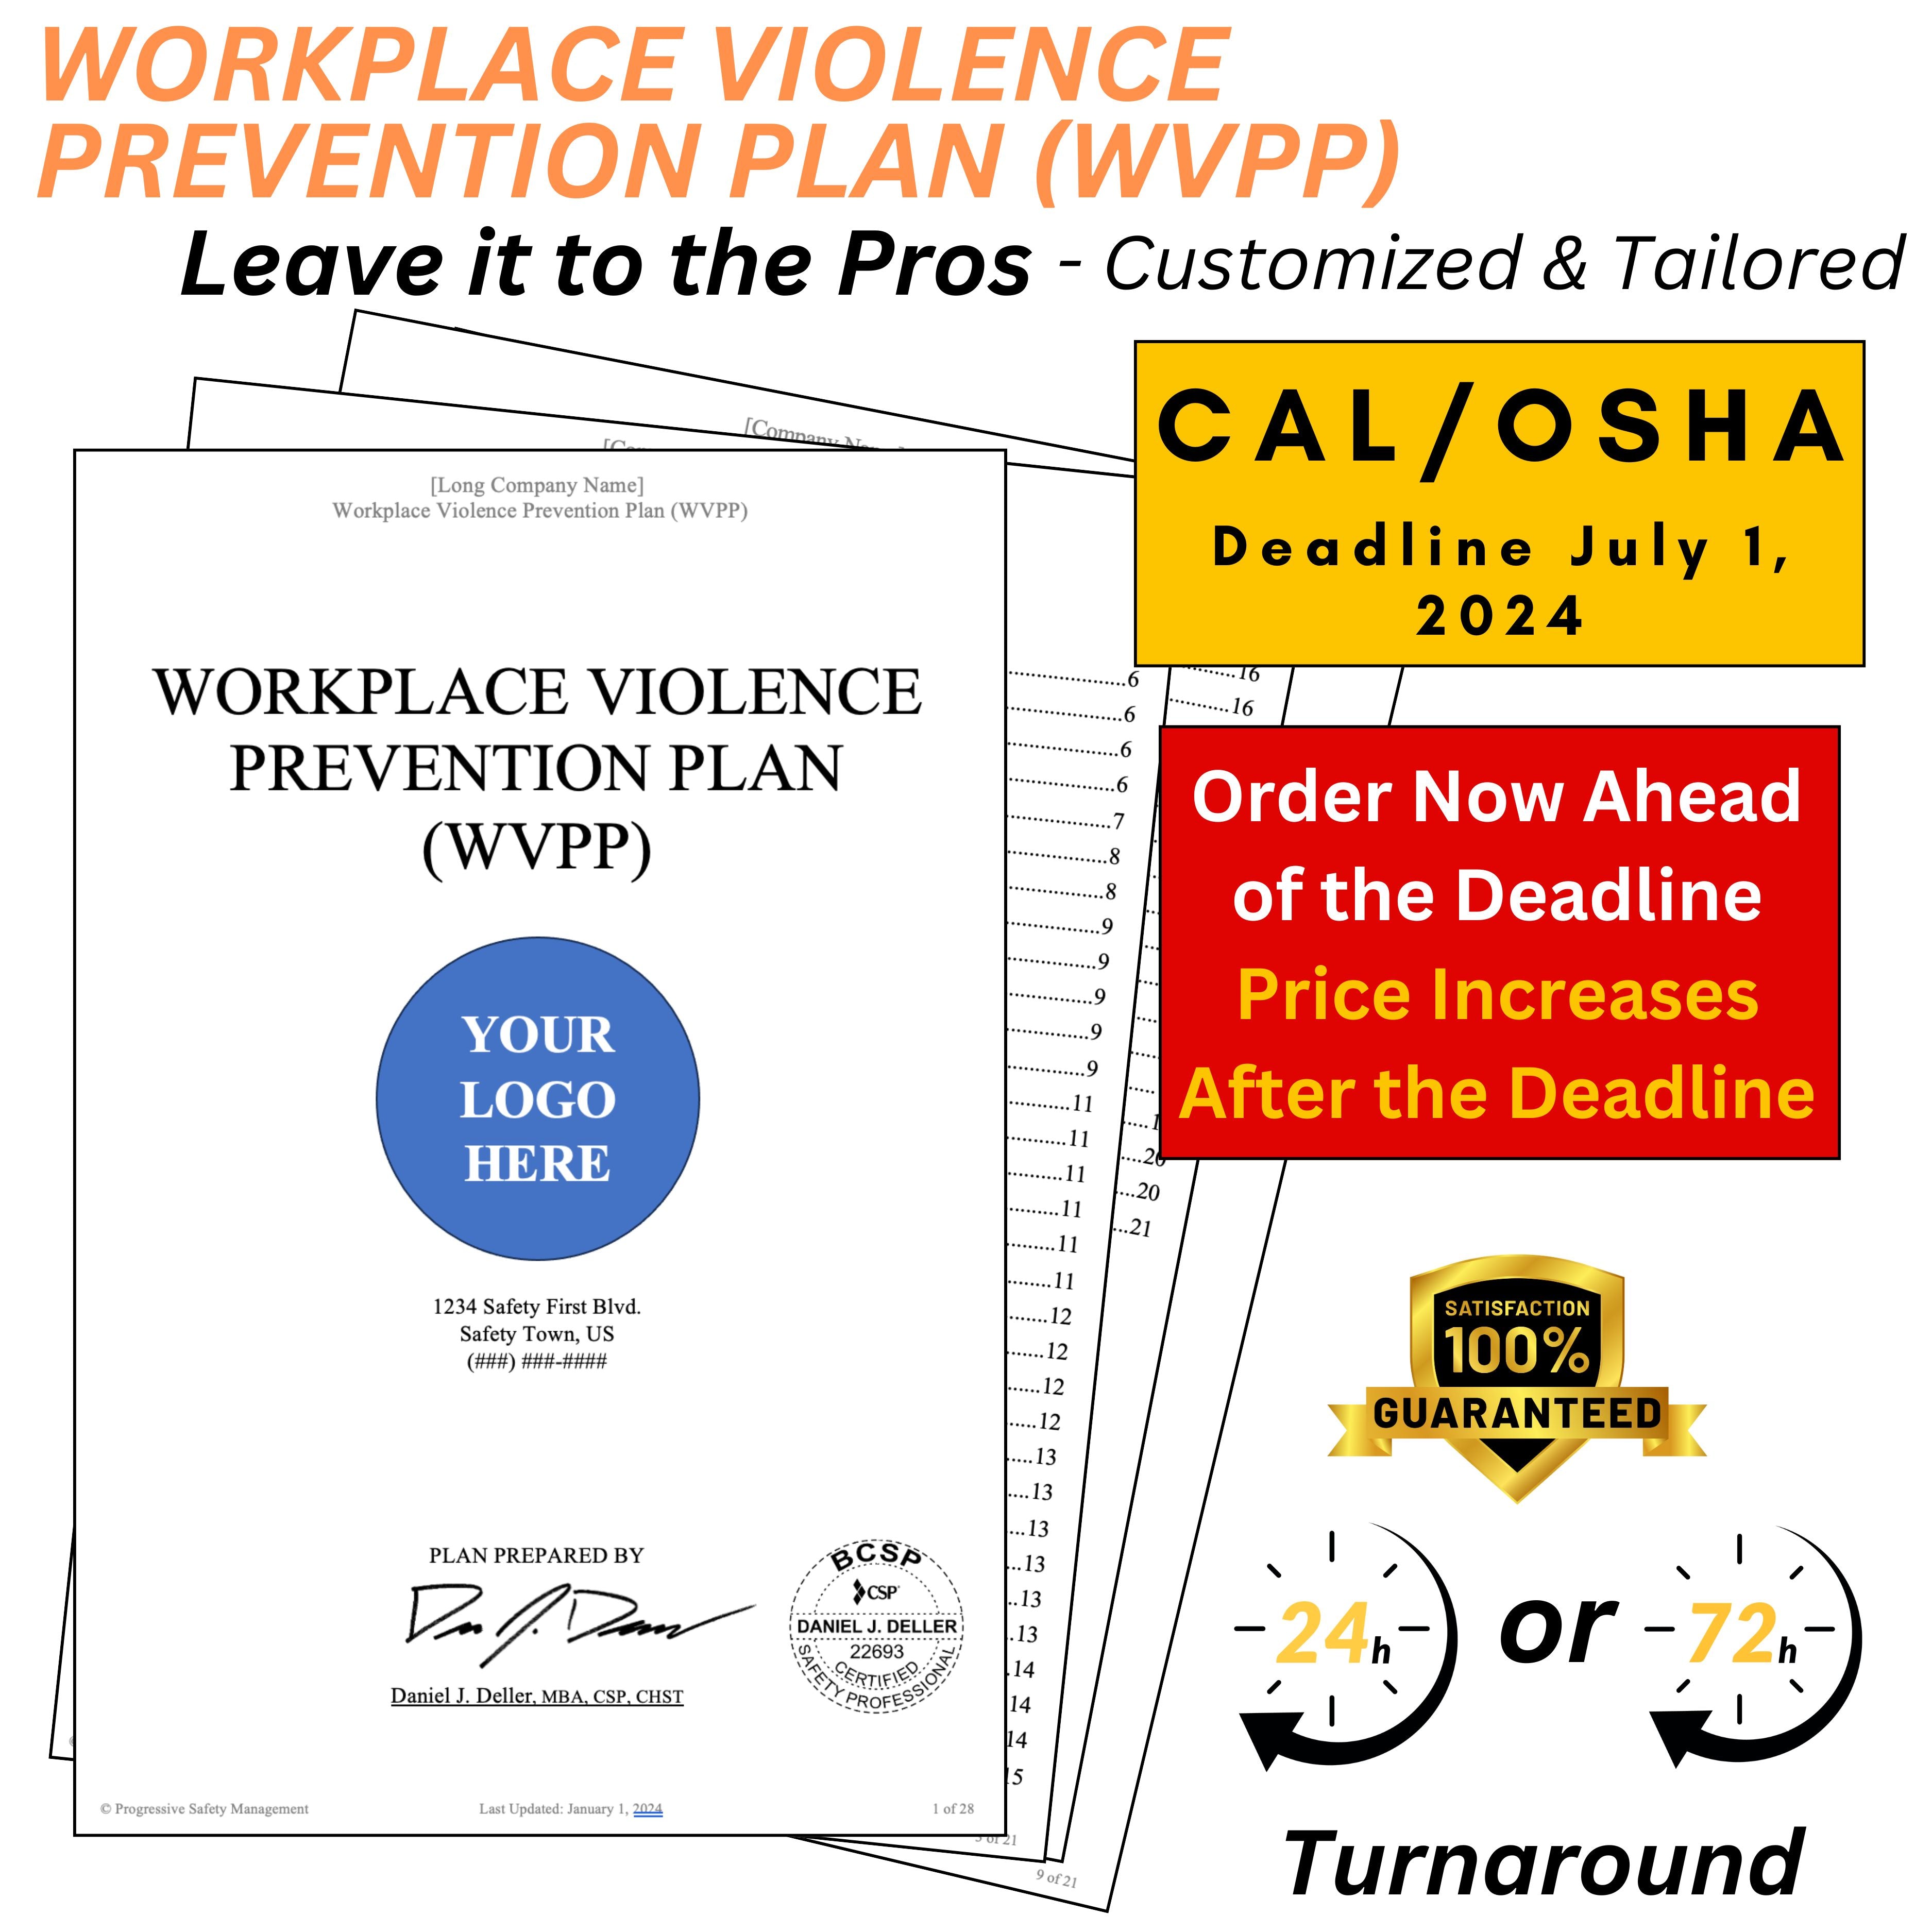 Workplace Violence Prevention Plan (WVPP)